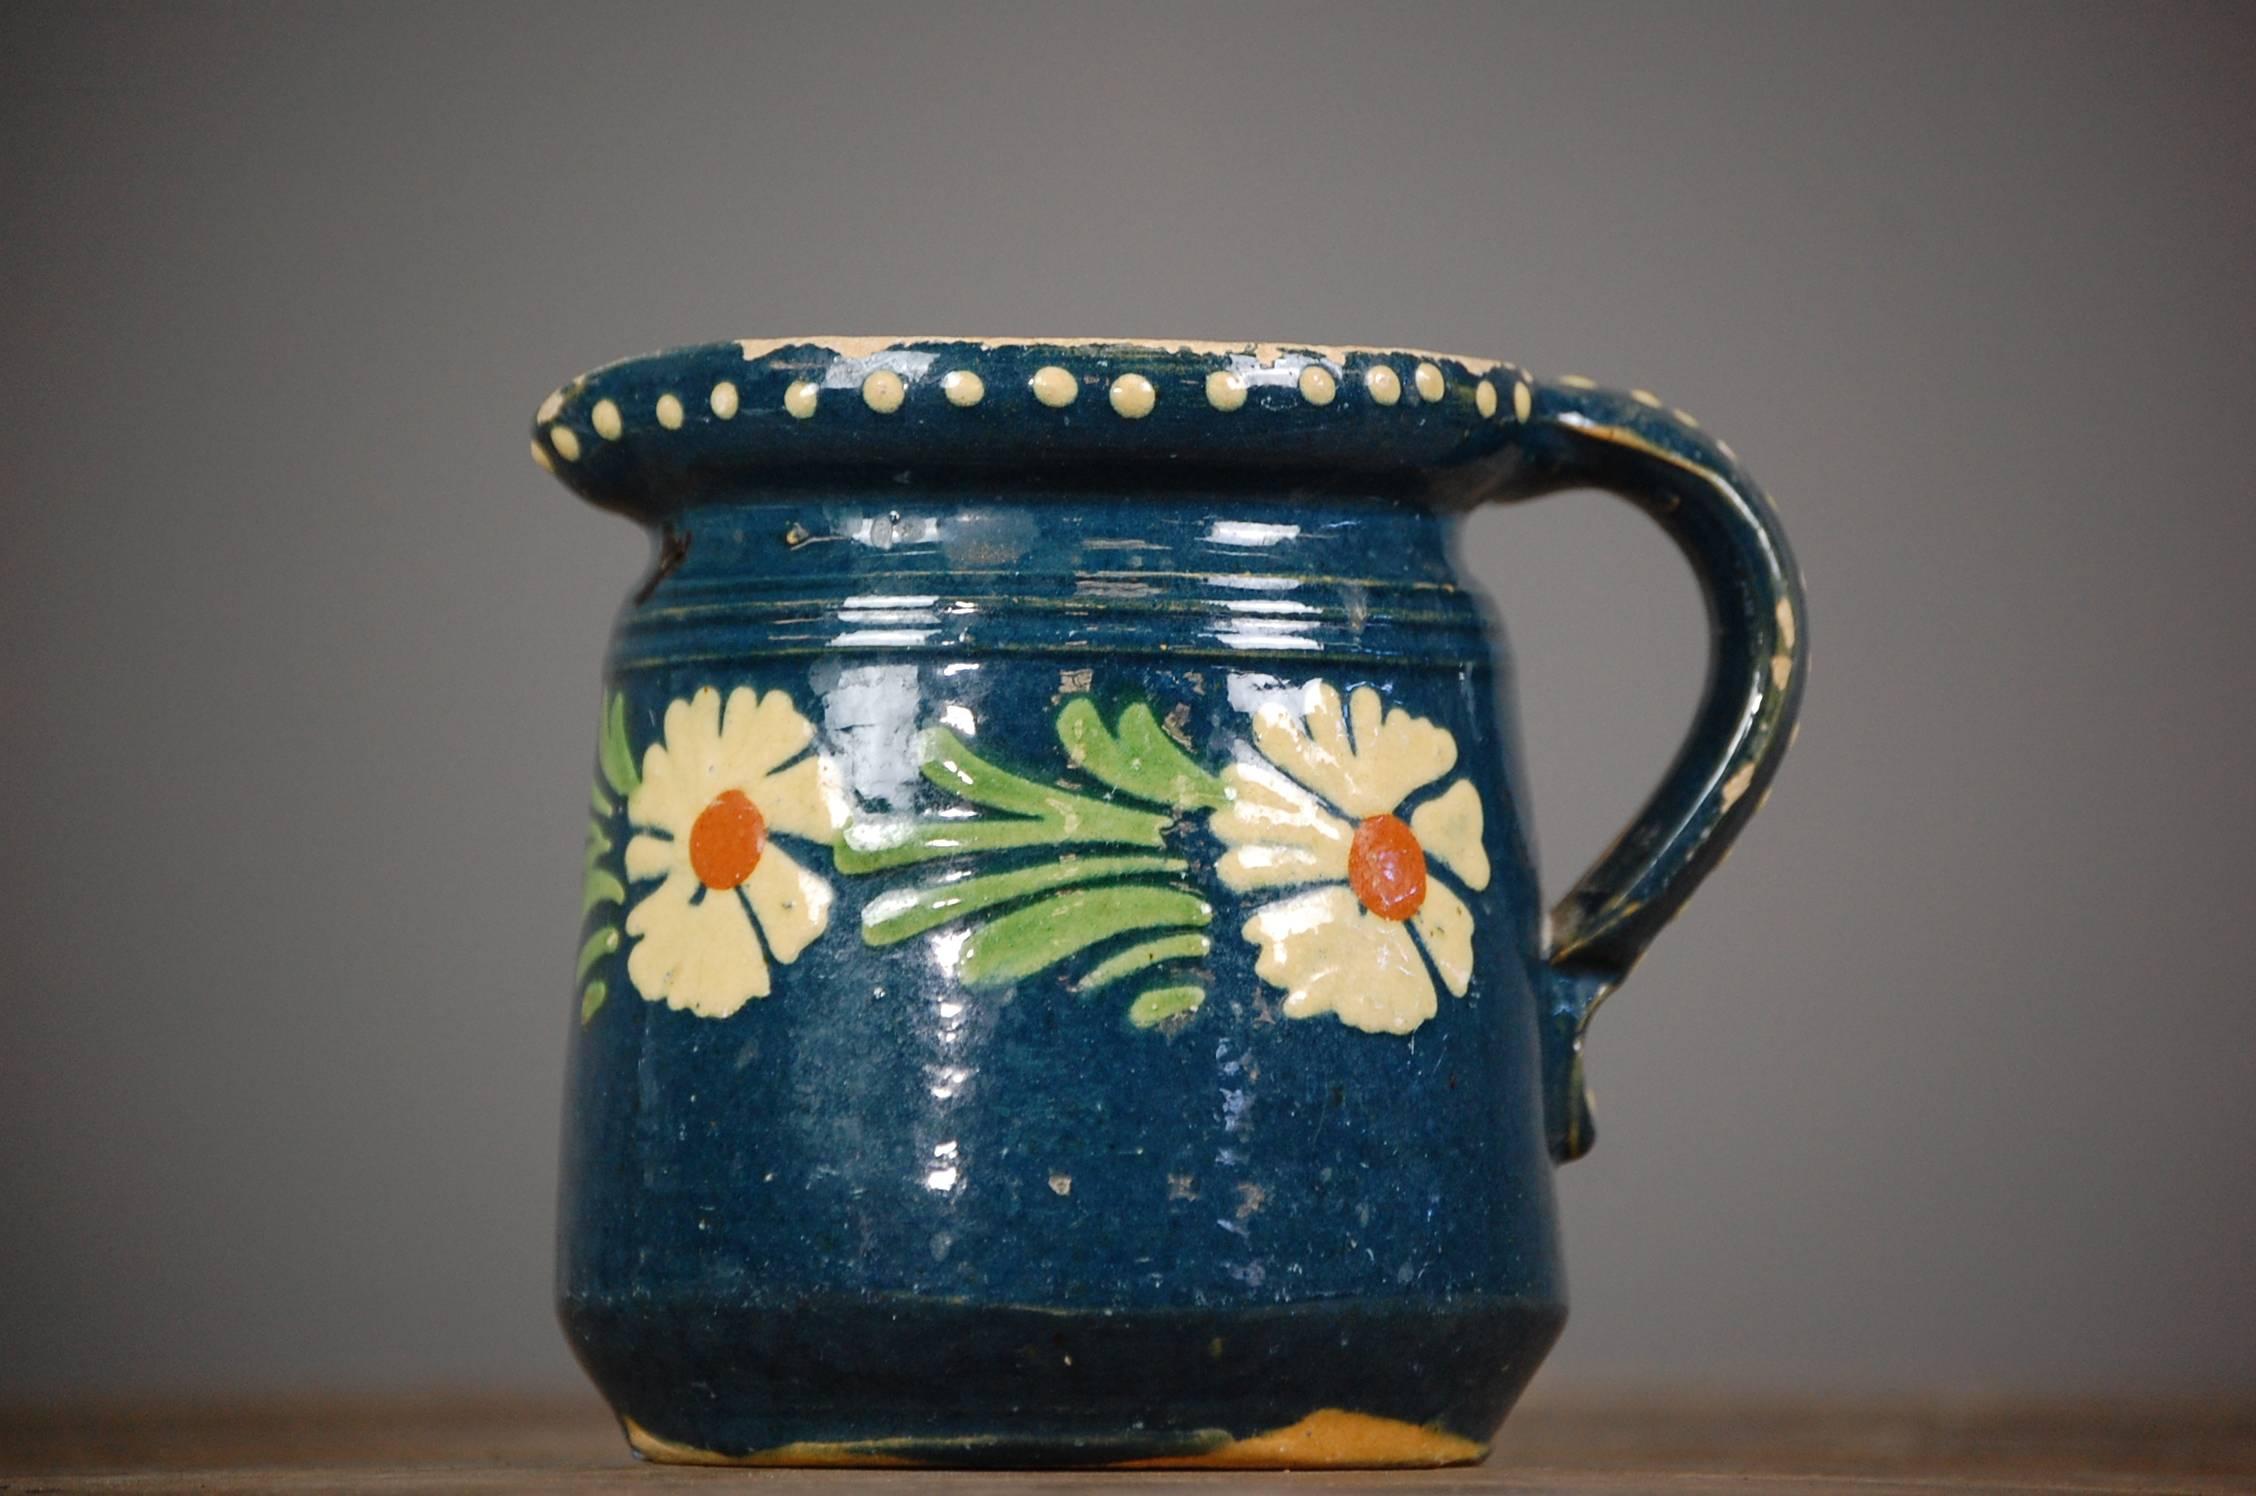 Charming late 19th century French slipware cream jug, originating from Burgundy, blue base and floral design.